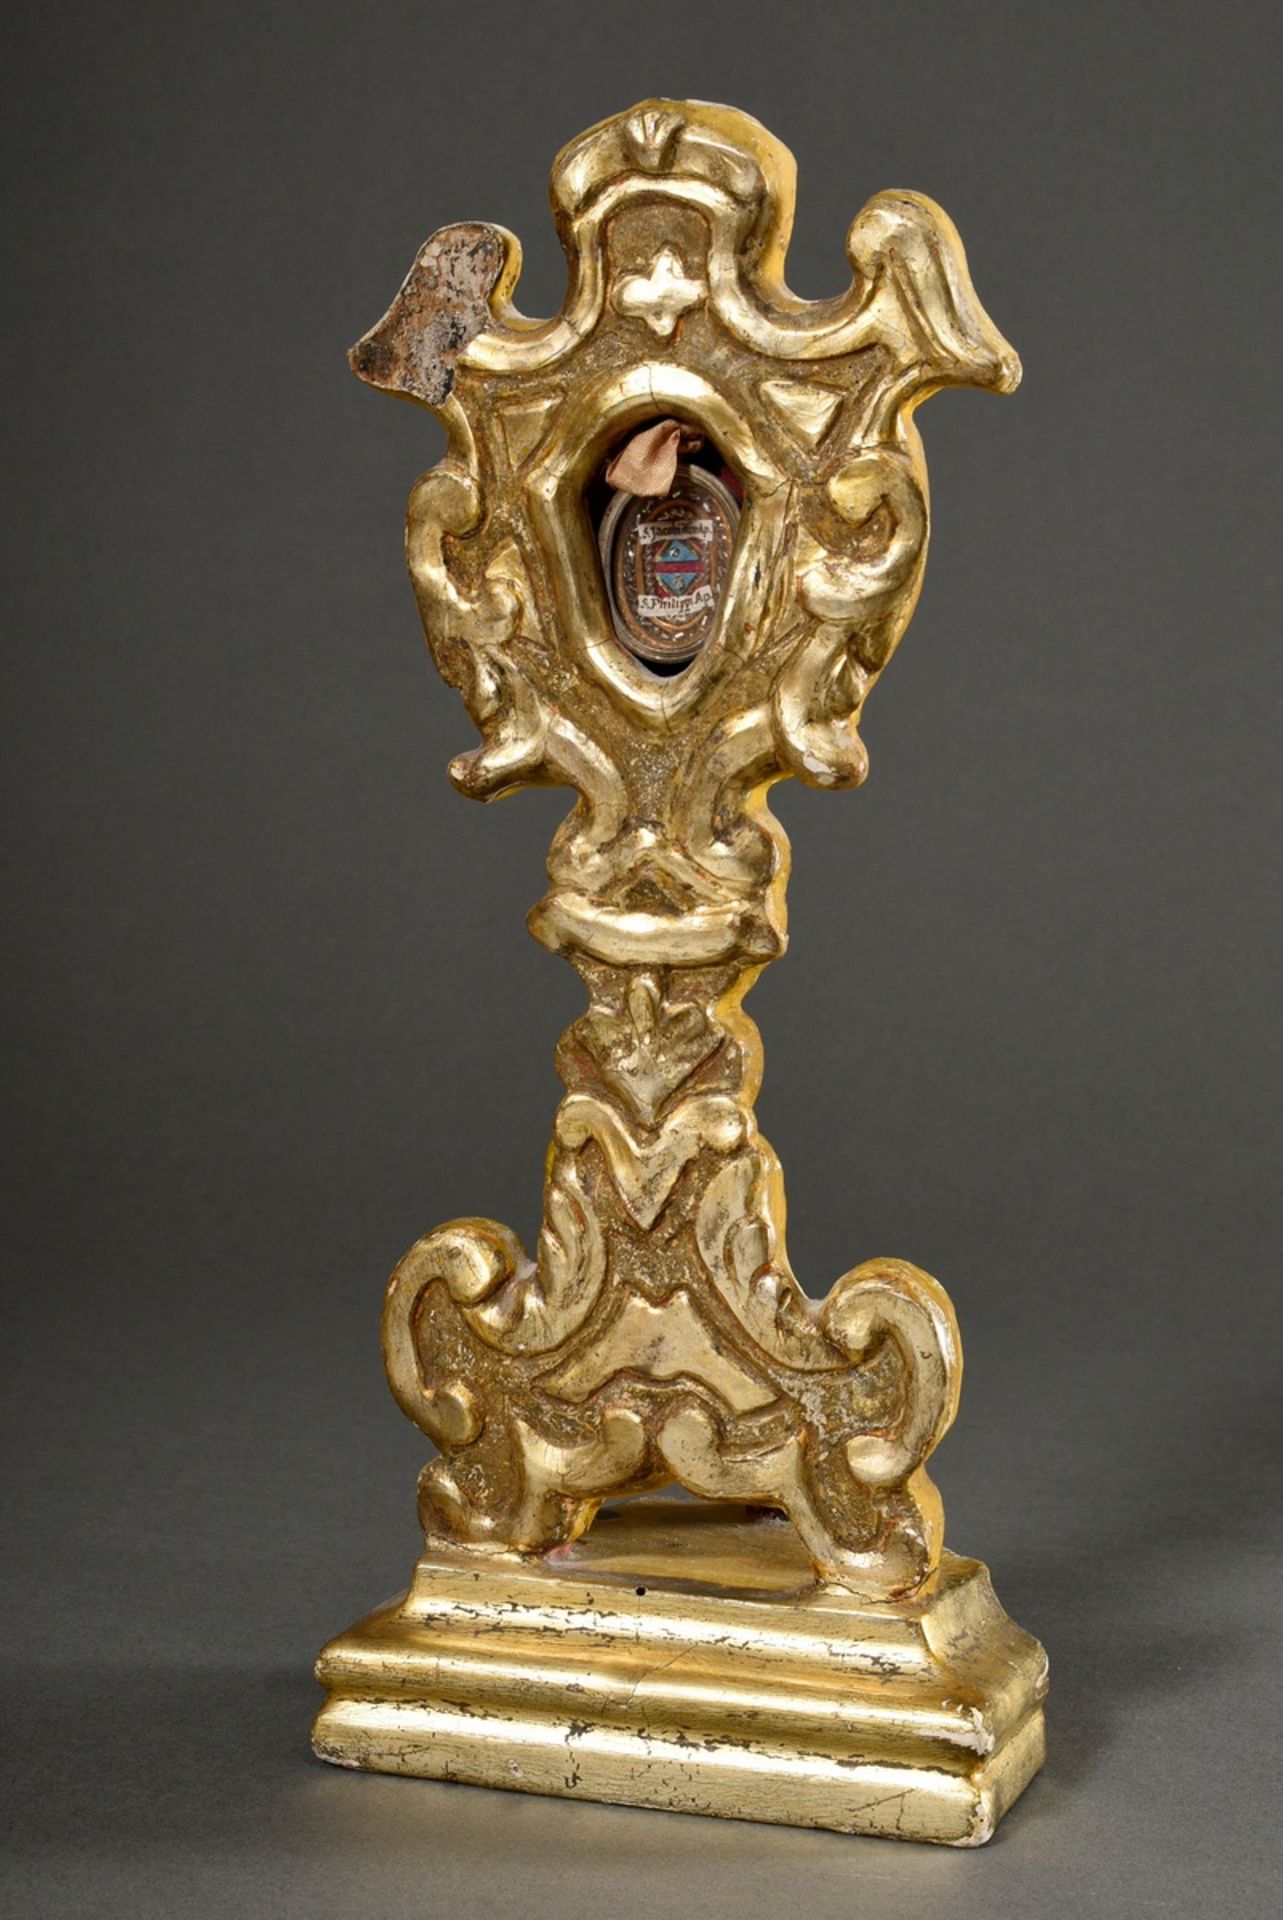 Baroque reliquary with small monastery work "S. Jacobi..." and S. Philippi Ap.", 18th c., carved an